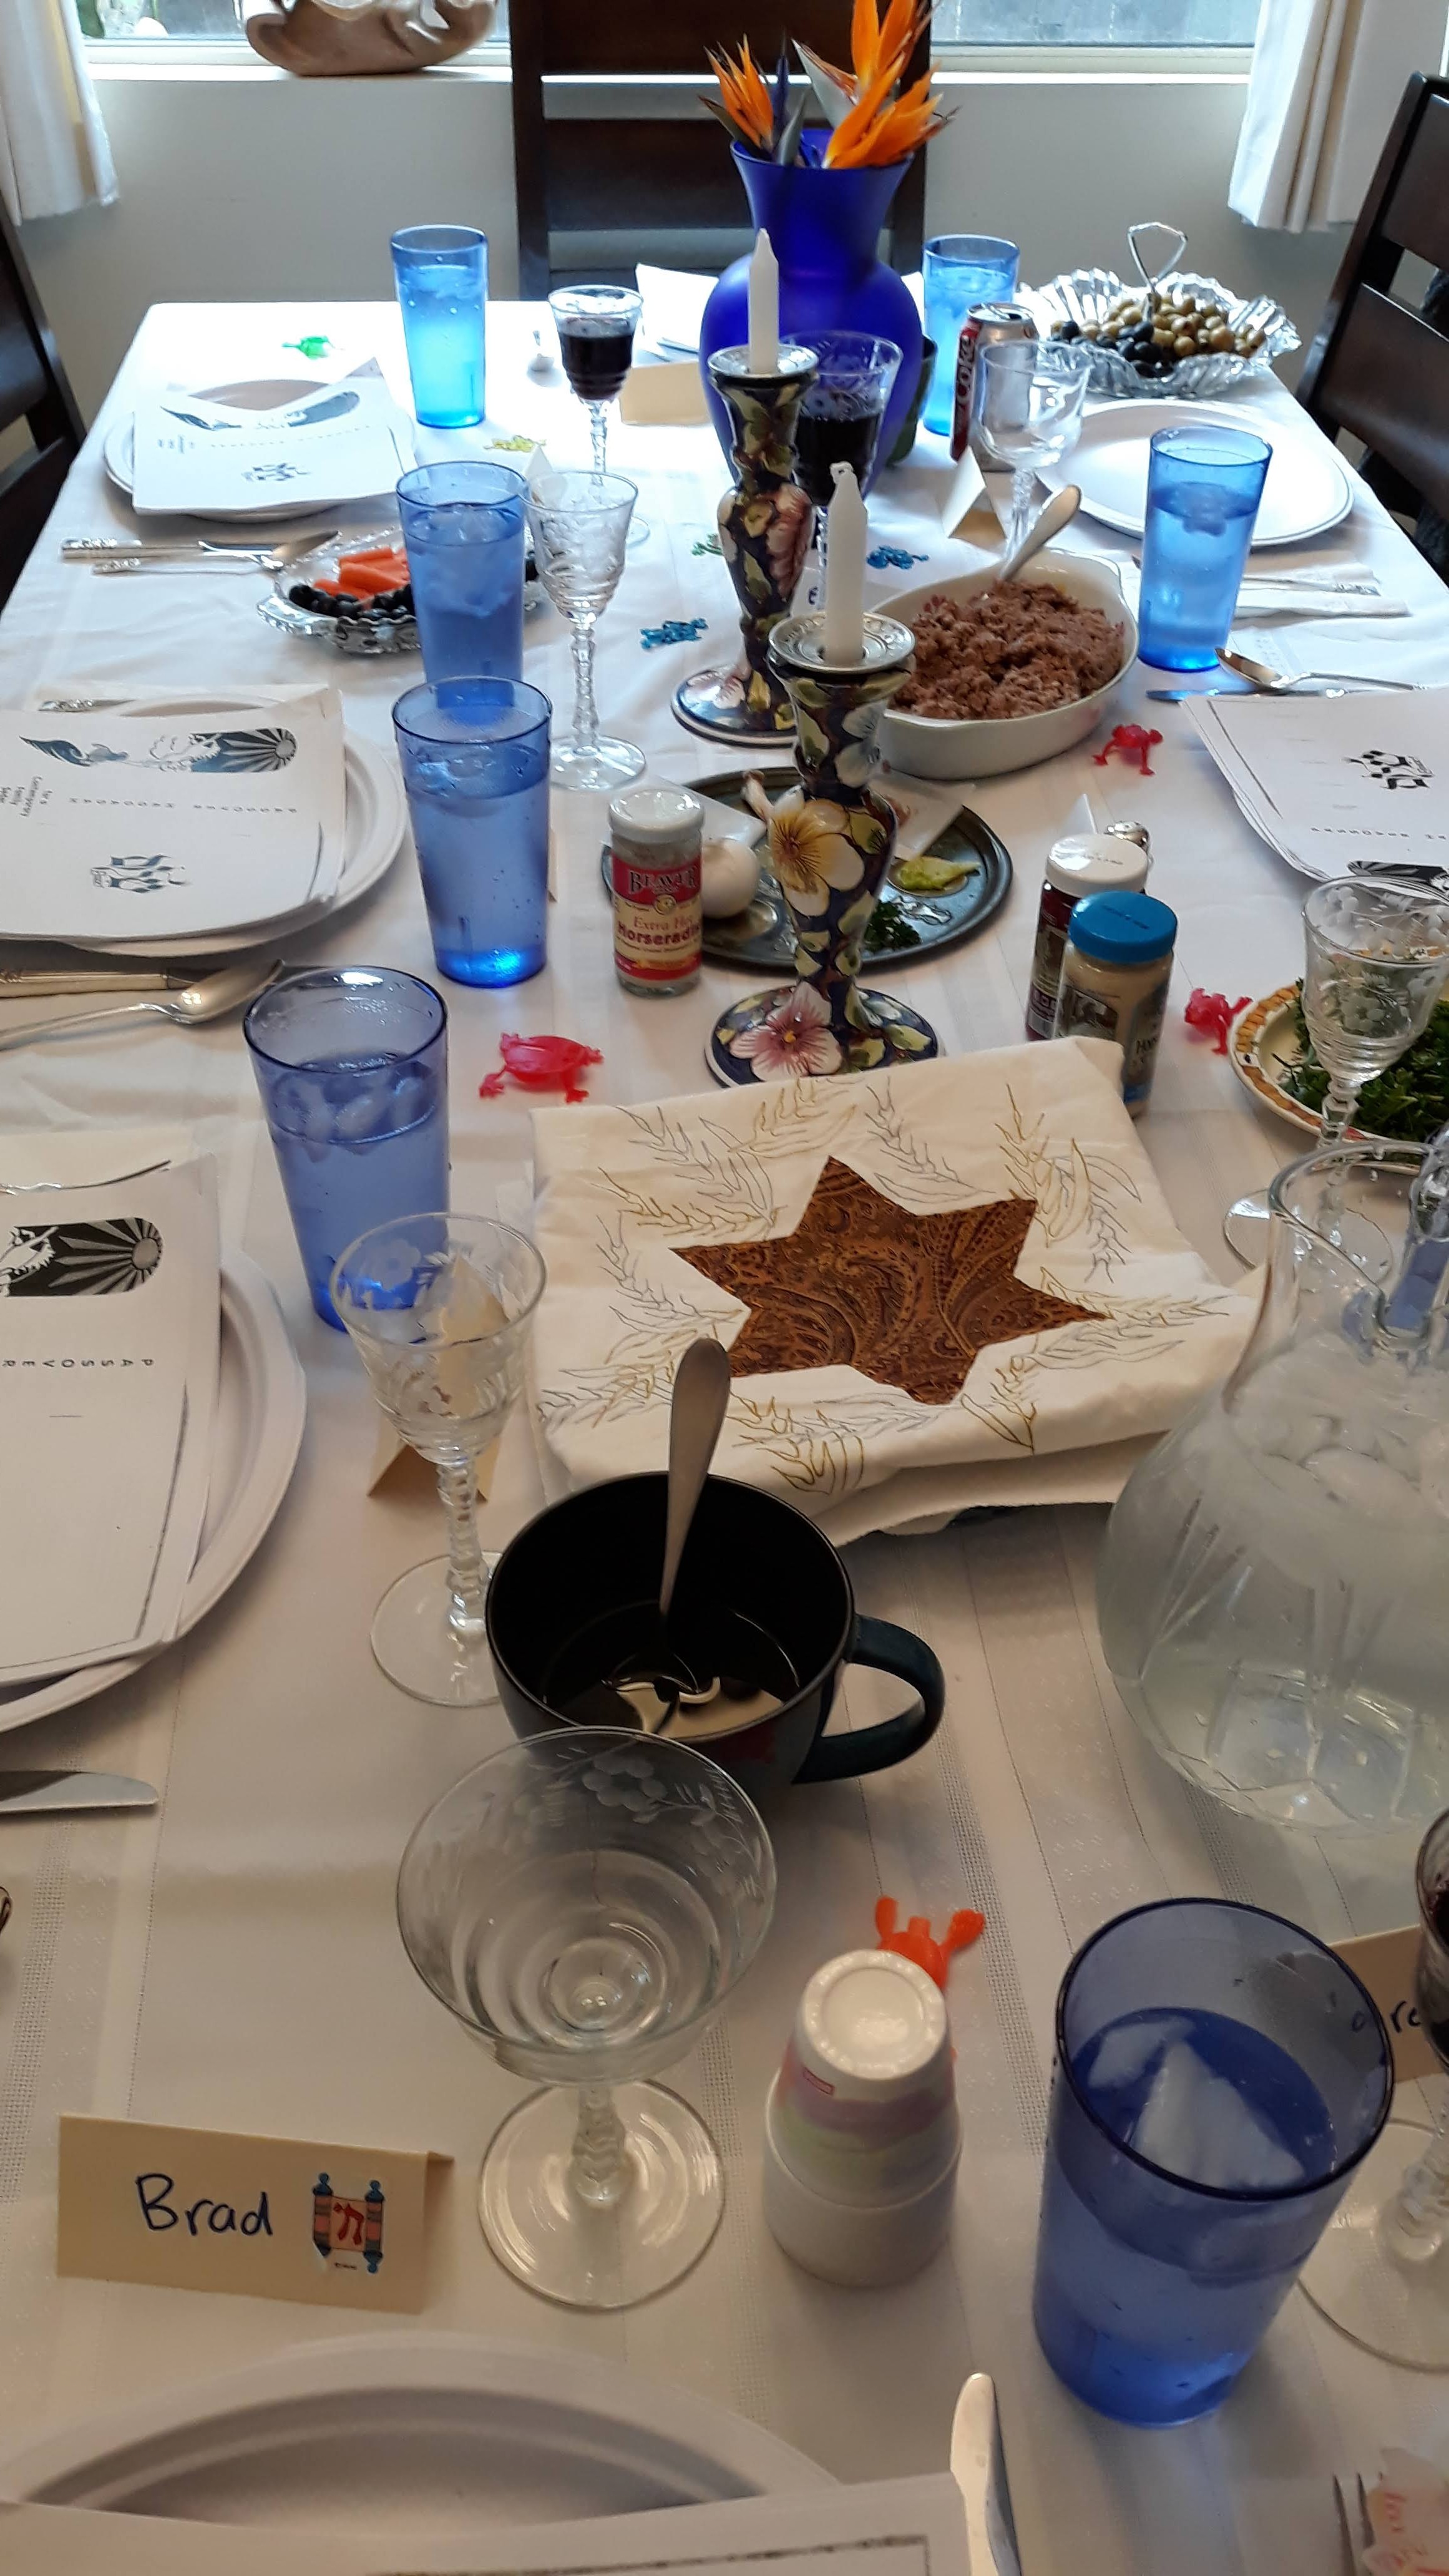 The biggest Jewish ceremony at home is the “Passover” Seder.